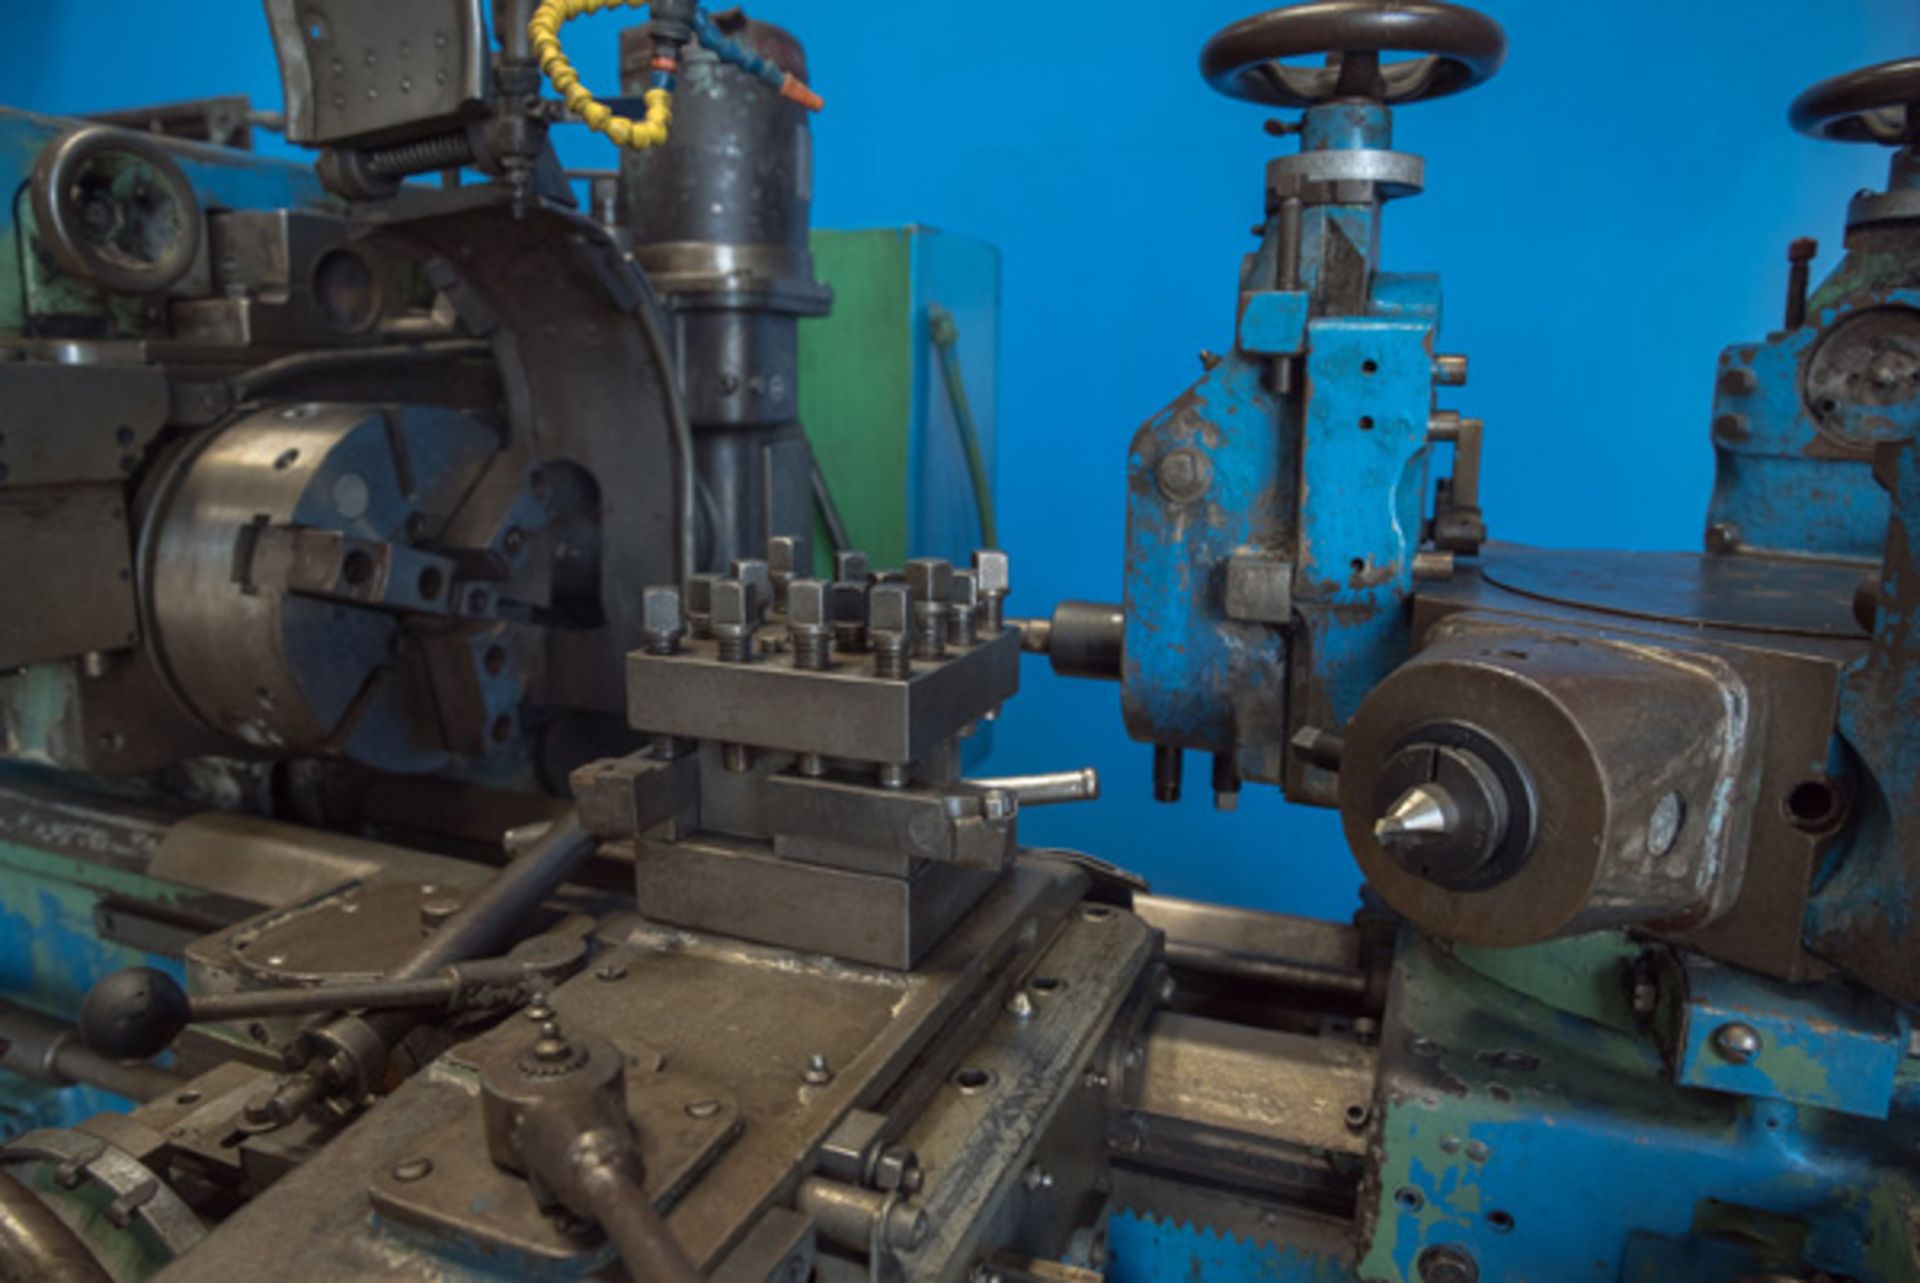 Warner & Swasey Turret Lathe | 18" x 32", Located In: Huntington Park, CA - 4552 - Image 14 of 14